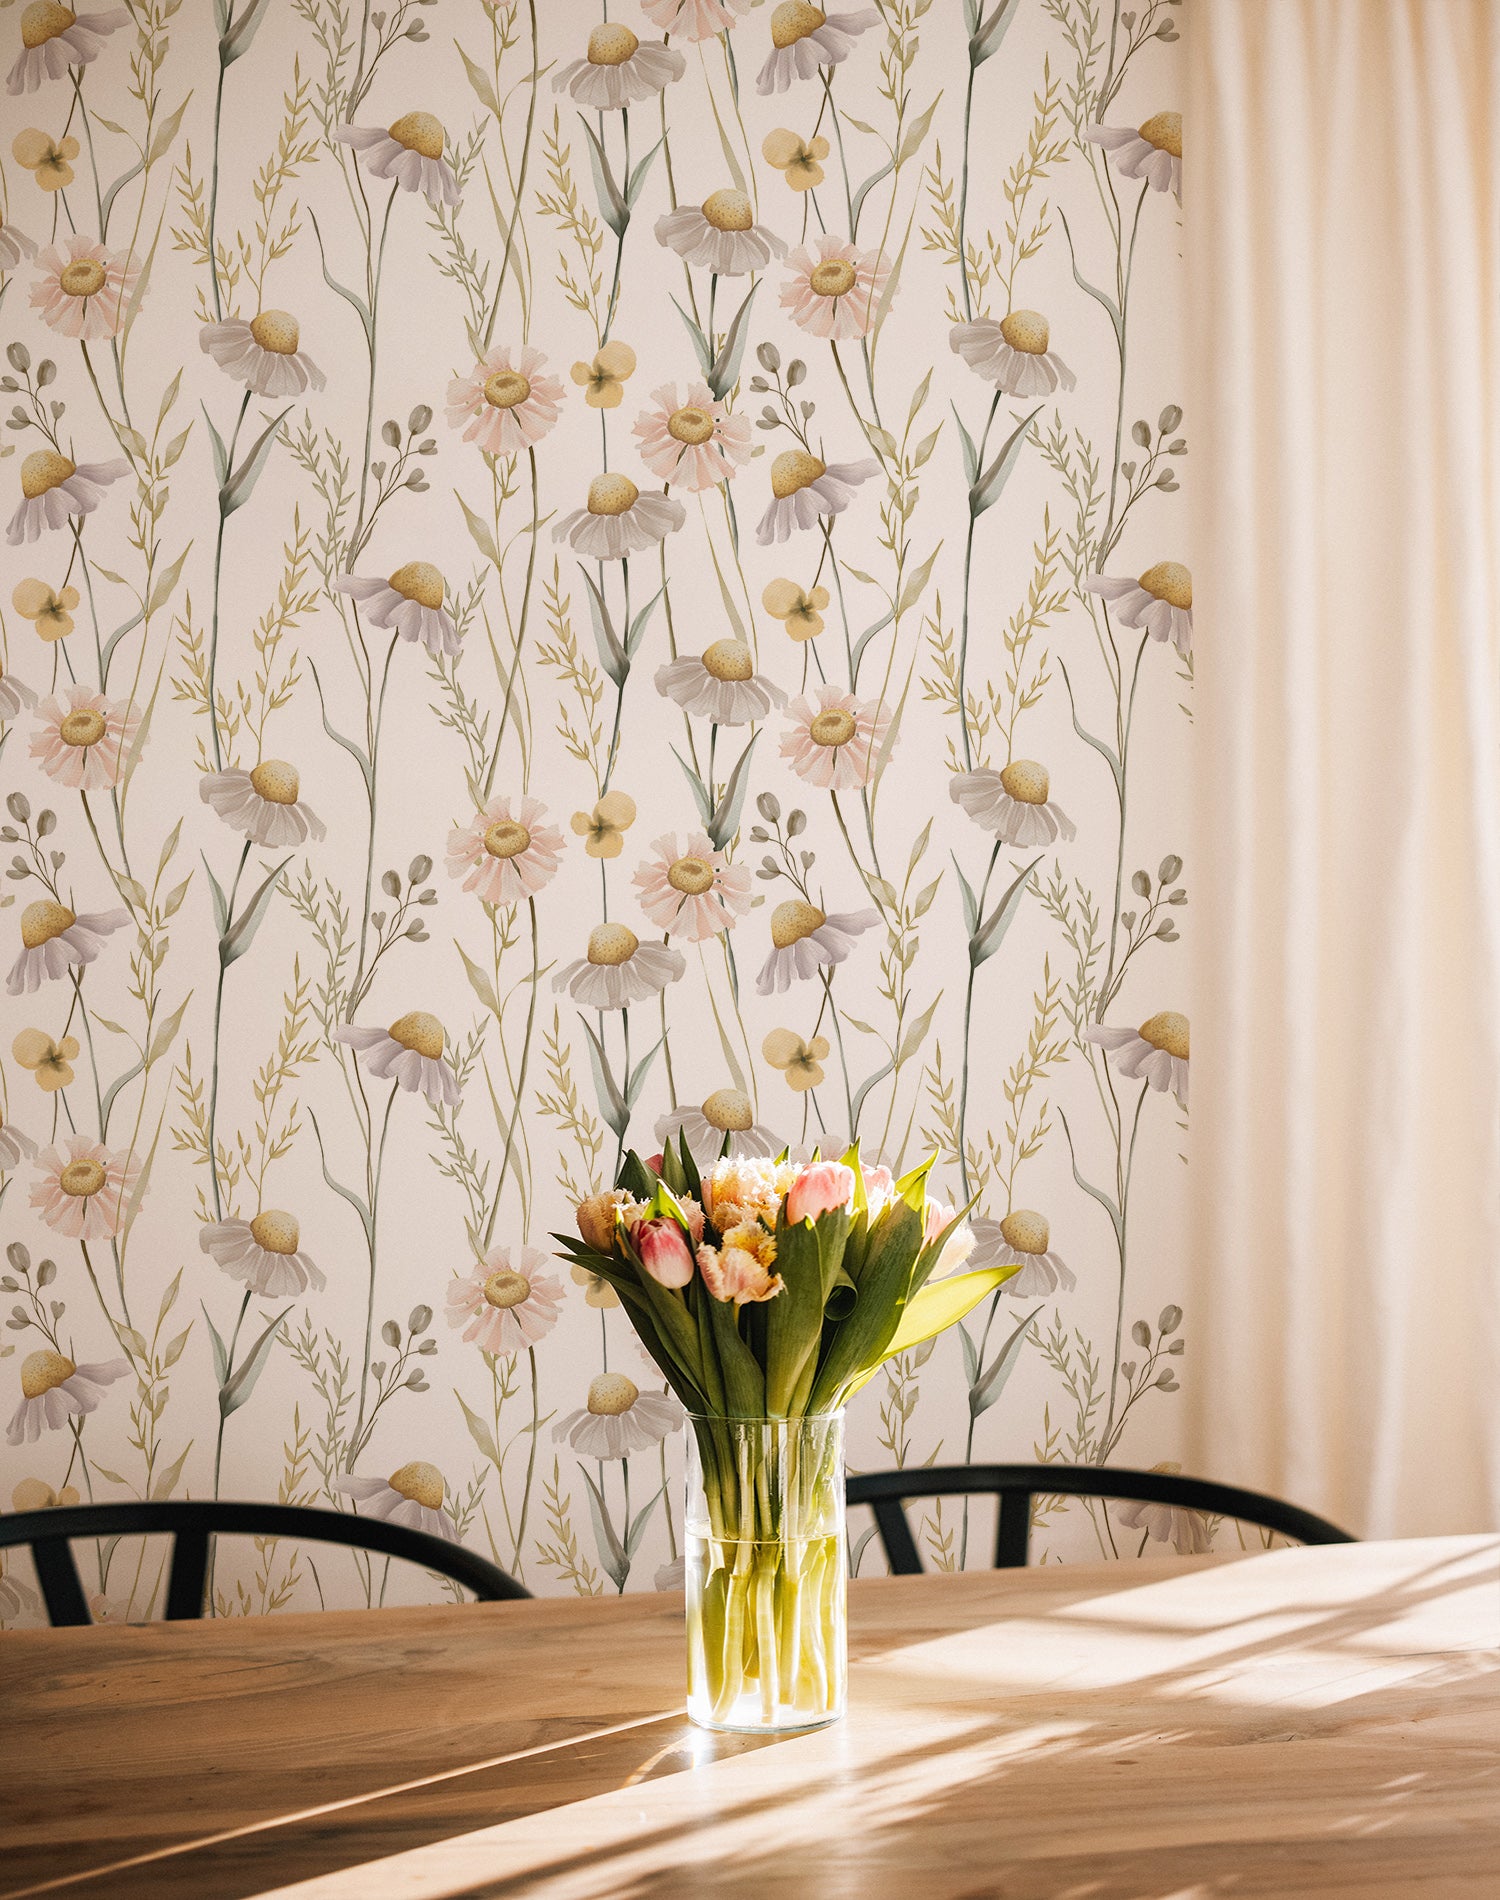 The Watercolour Daisy Wallpaper adds a delicate touch to a sunny dining area, complementing the natural wood furniture and a vase of fresh flowers on the table, which enhance the room's welcoming and cheerful ambiance.